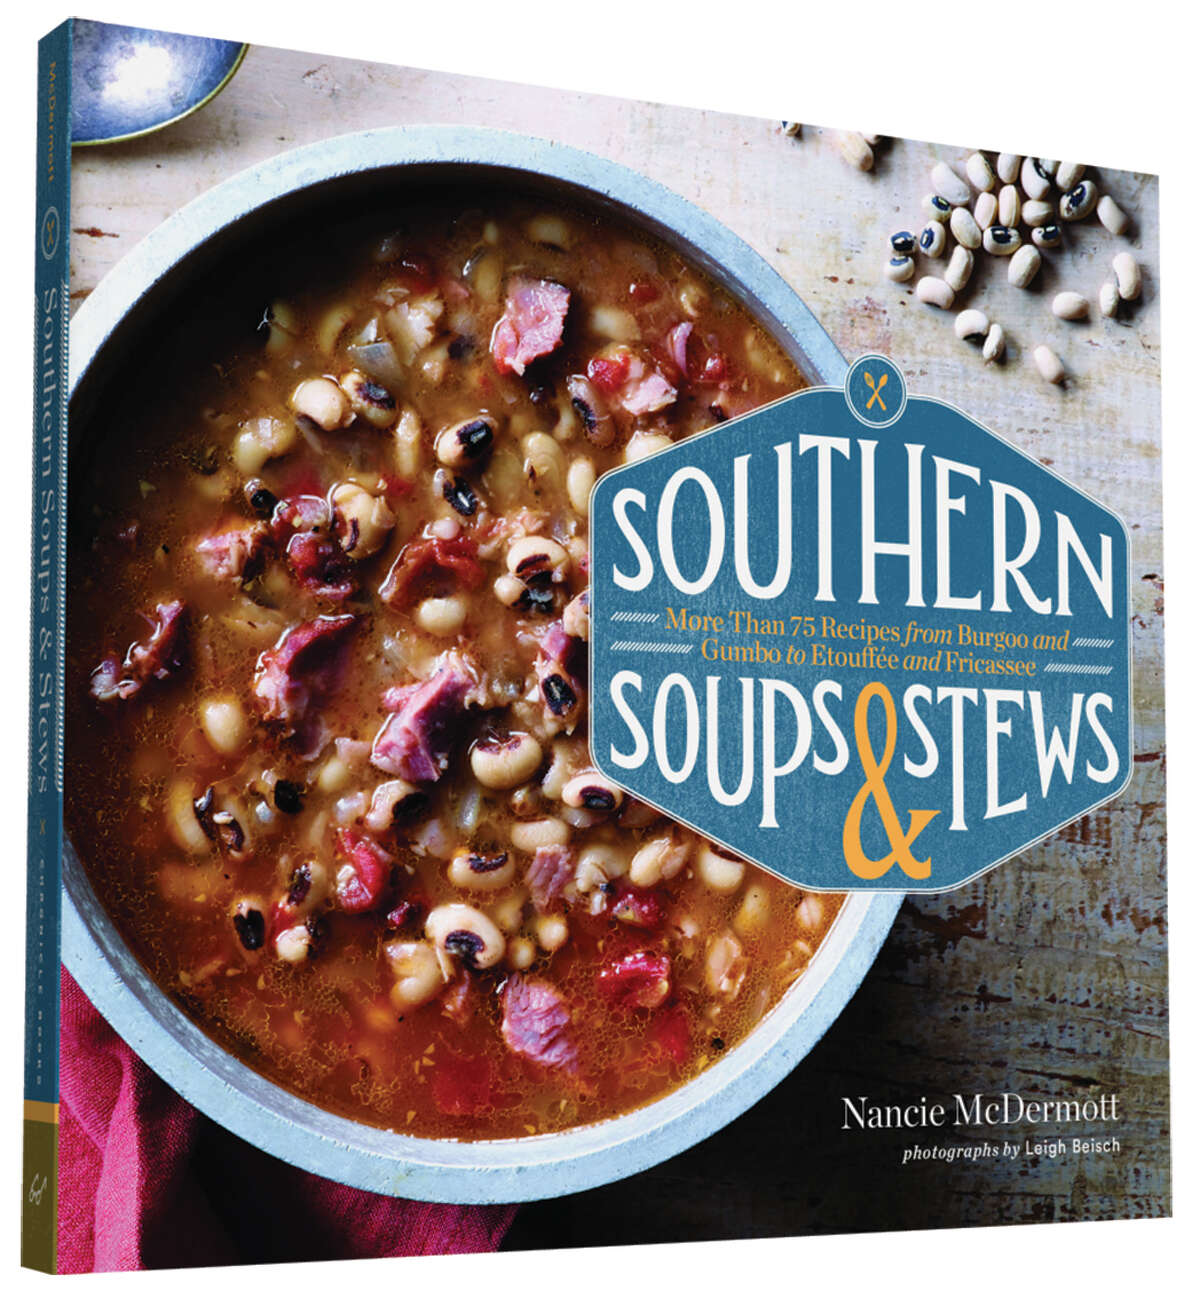 Southern Soups & Stews, More than 75 recipes from Burgoo and Gumbo to Etouffee and Fricassee, by Nancie McDermott, 175 pages, $24.95.